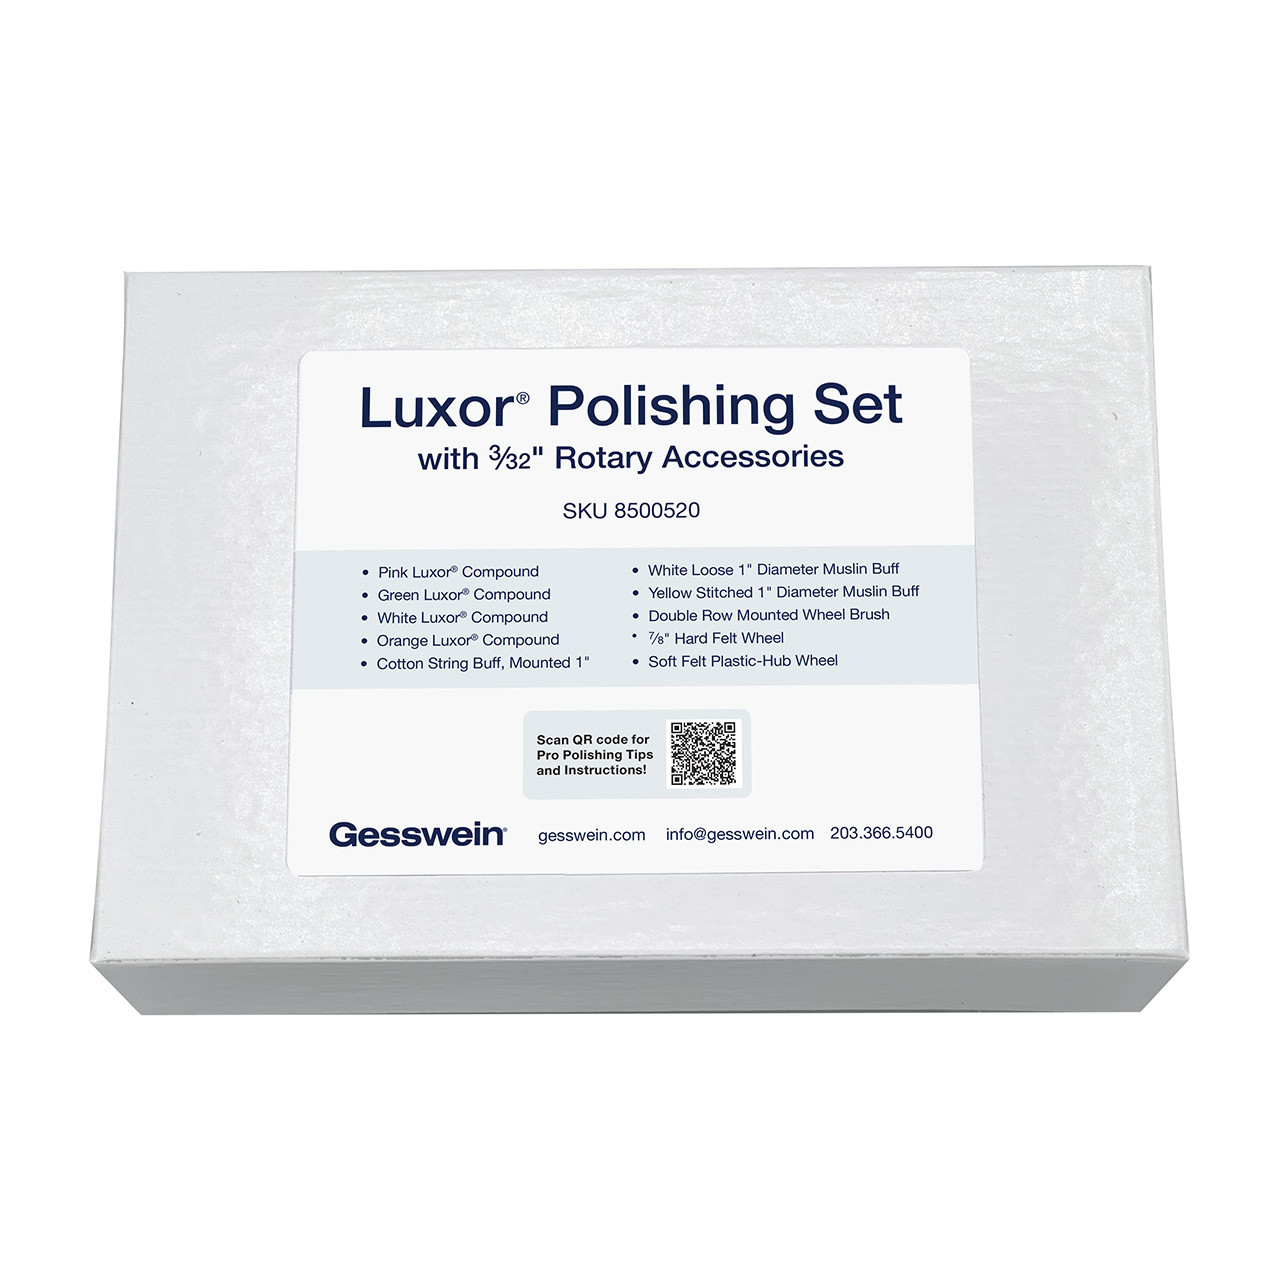 Luxor® Polishing Set with 3/32” Rotary Accessories